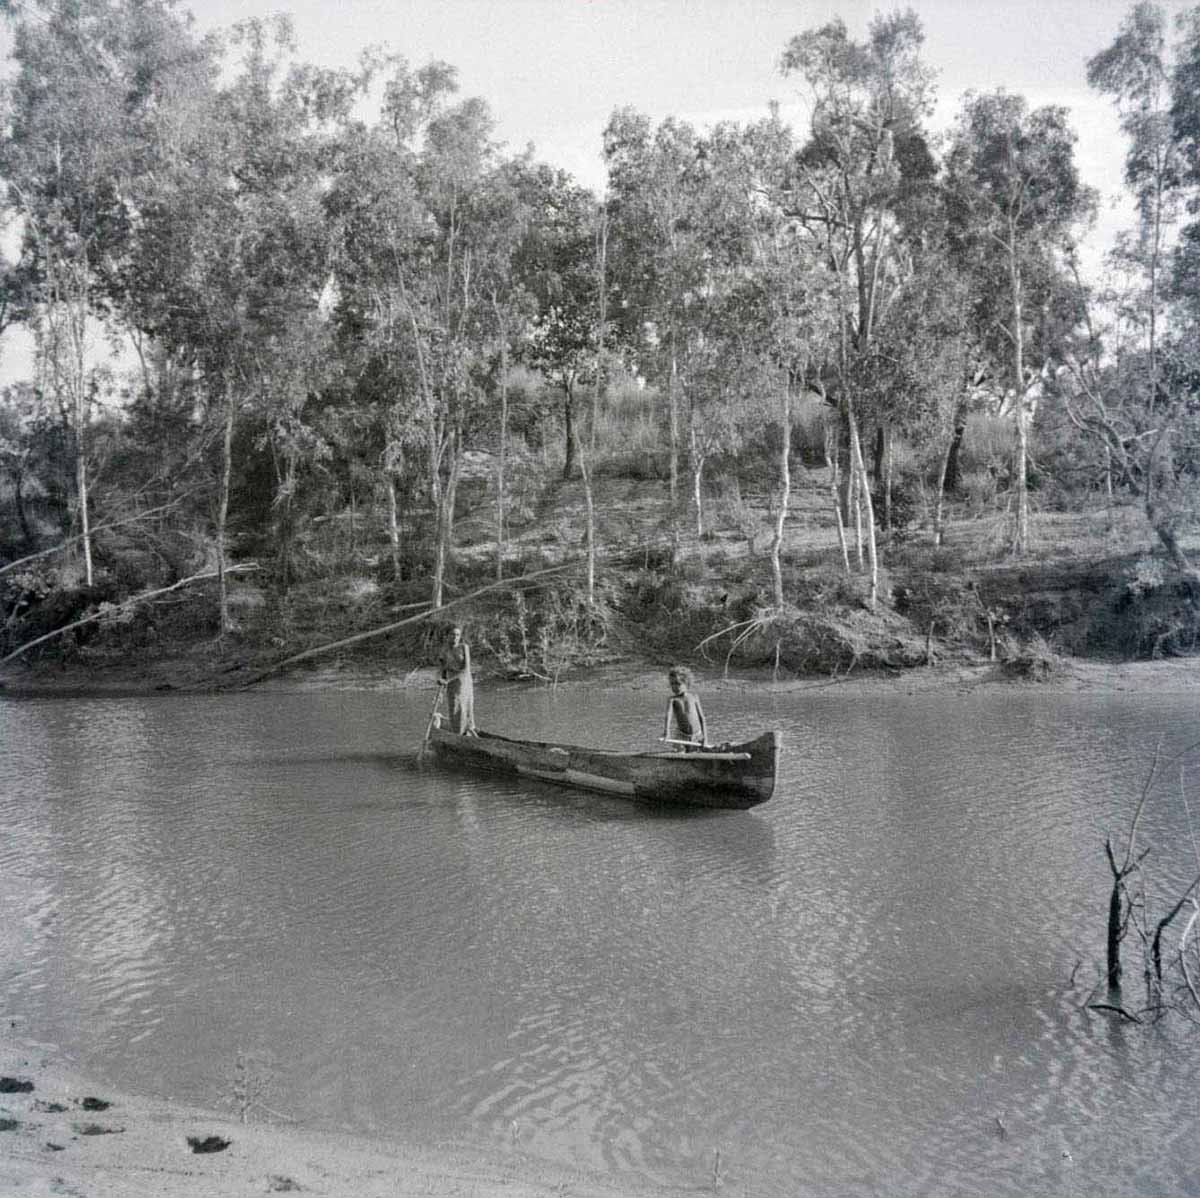 A black and white photographic negative that depicts an Aboriginal child and adult standing in a canoe on a river. - click to view larger image